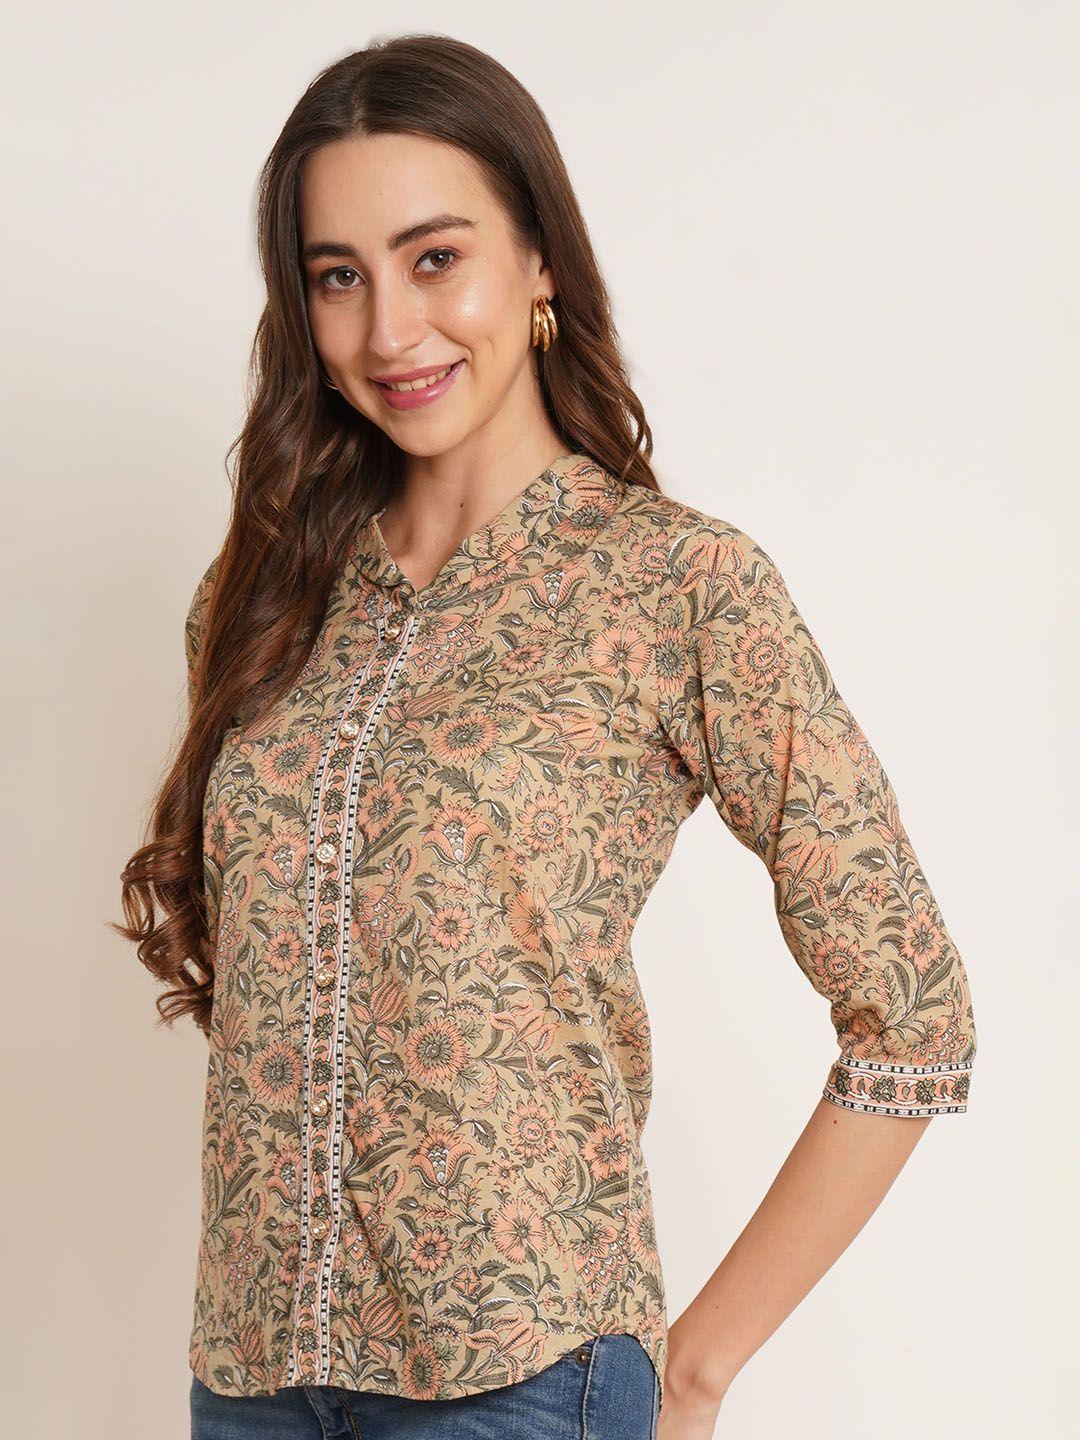 COTLAND FASHION Floral Printed Pure Cotton Shirt Style Top